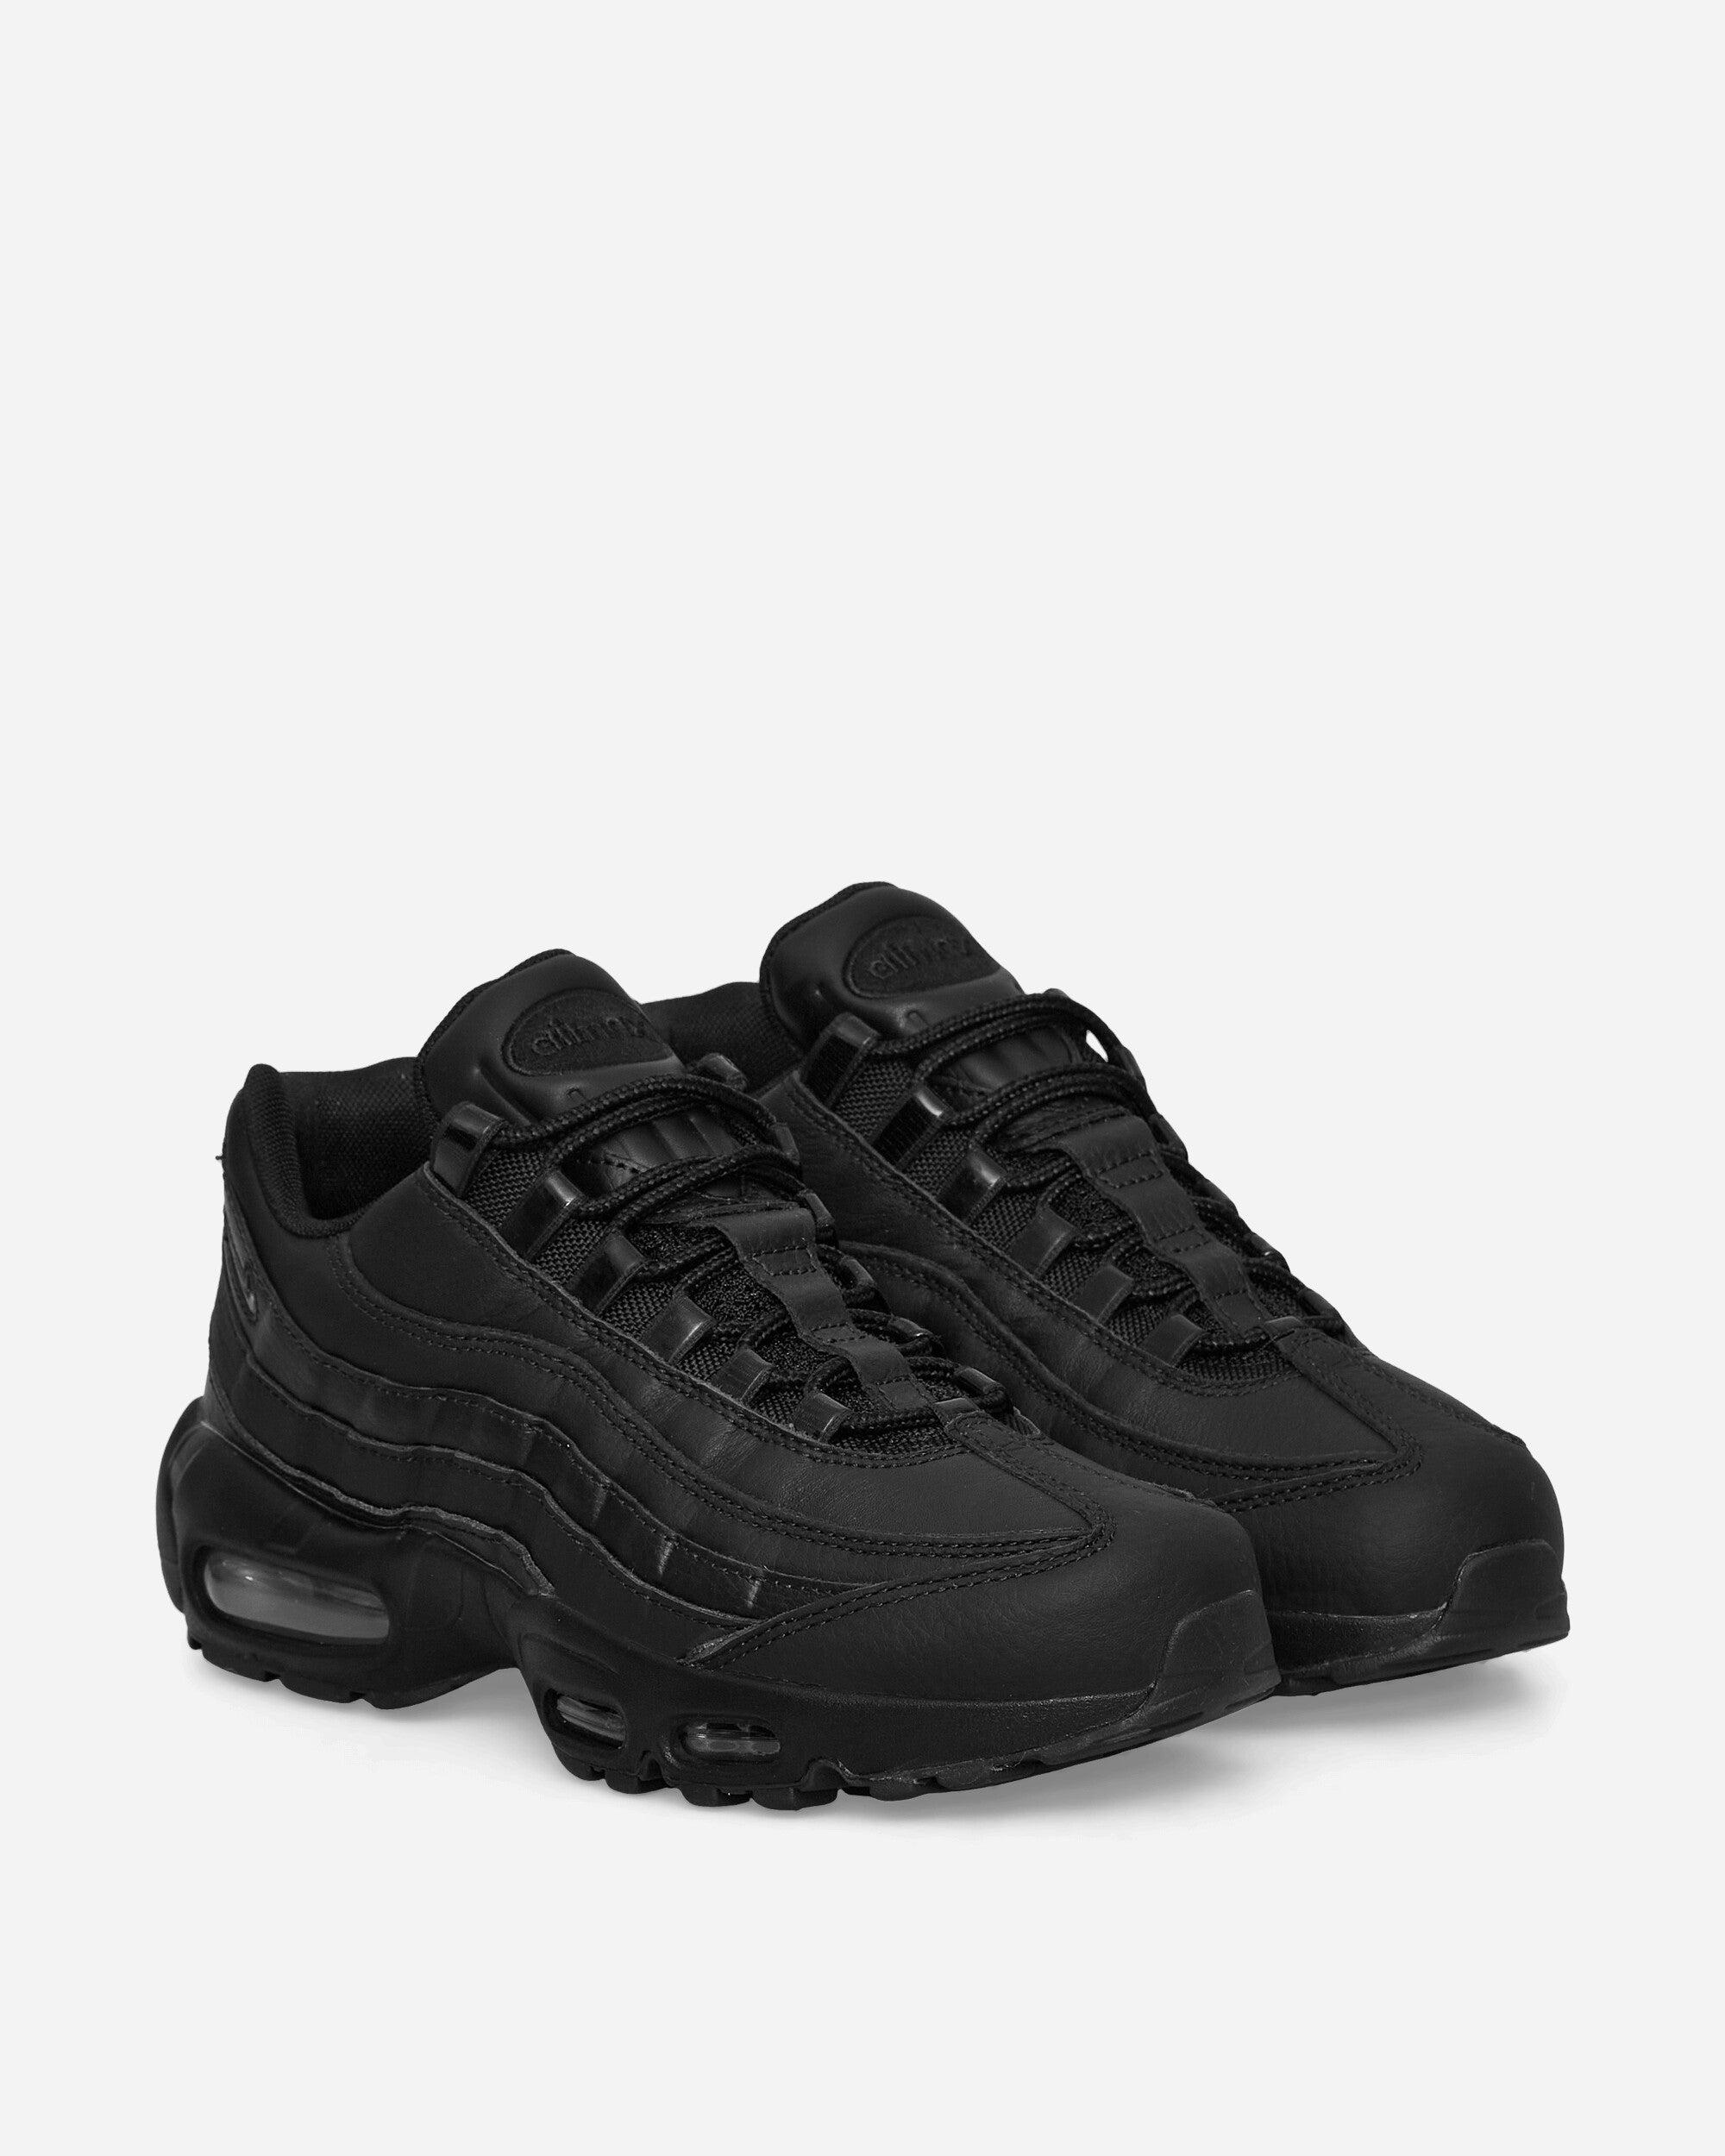 Nike Max 95 Leather, Suede And Woven Mid-top in Black for Lyst UK